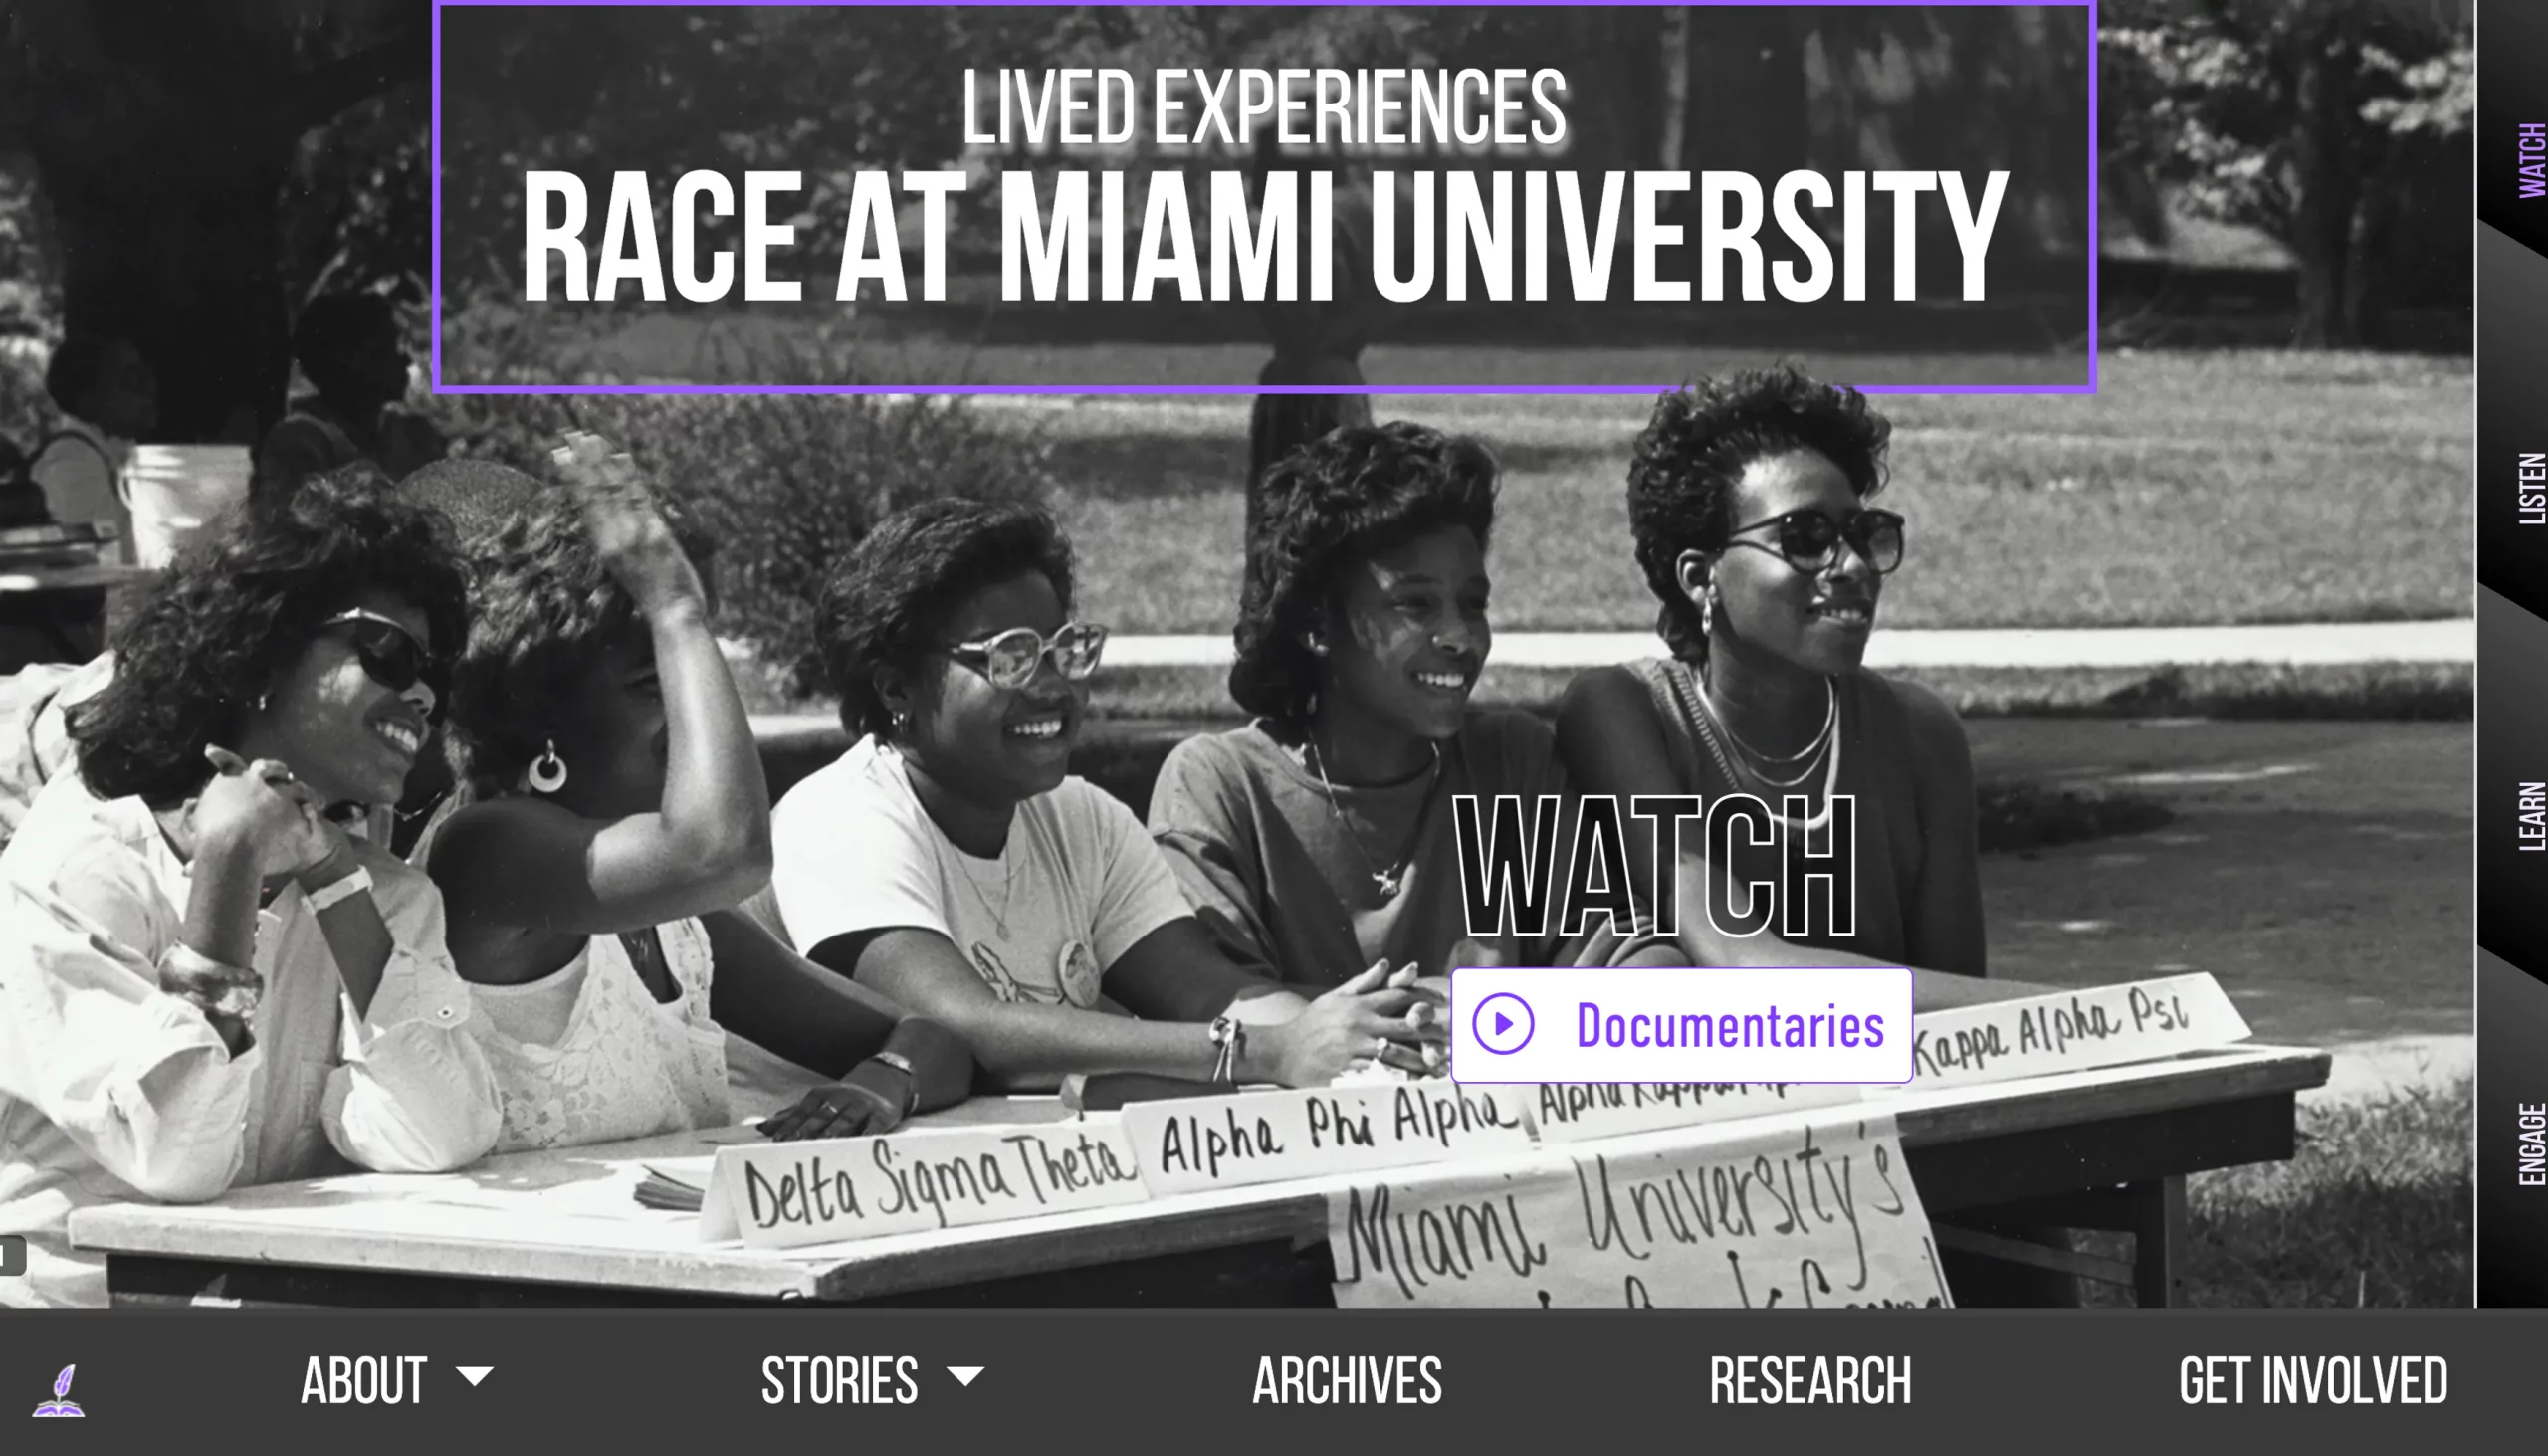 Lived Experiences website homepage screenshot. Features image of students of a Black sorority at Miami University